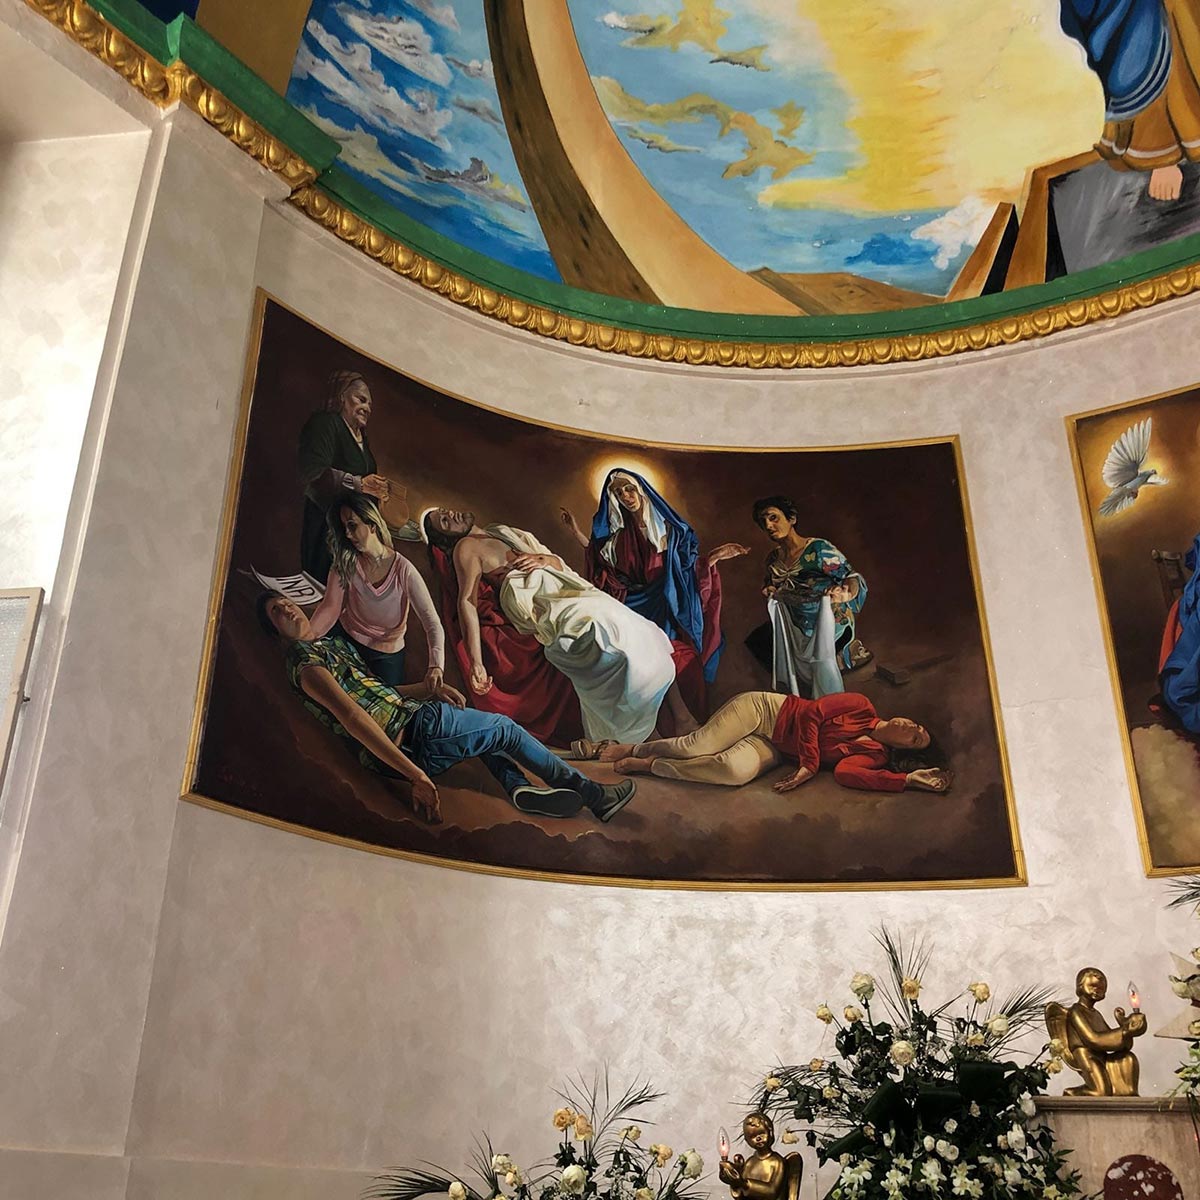 In one fresco commemorating the Duisburg massacre, the Virgin Mary is surrounded by mothers and their children from the feuding families, one holding a teddy bear. Photo by: Antonio Lemma